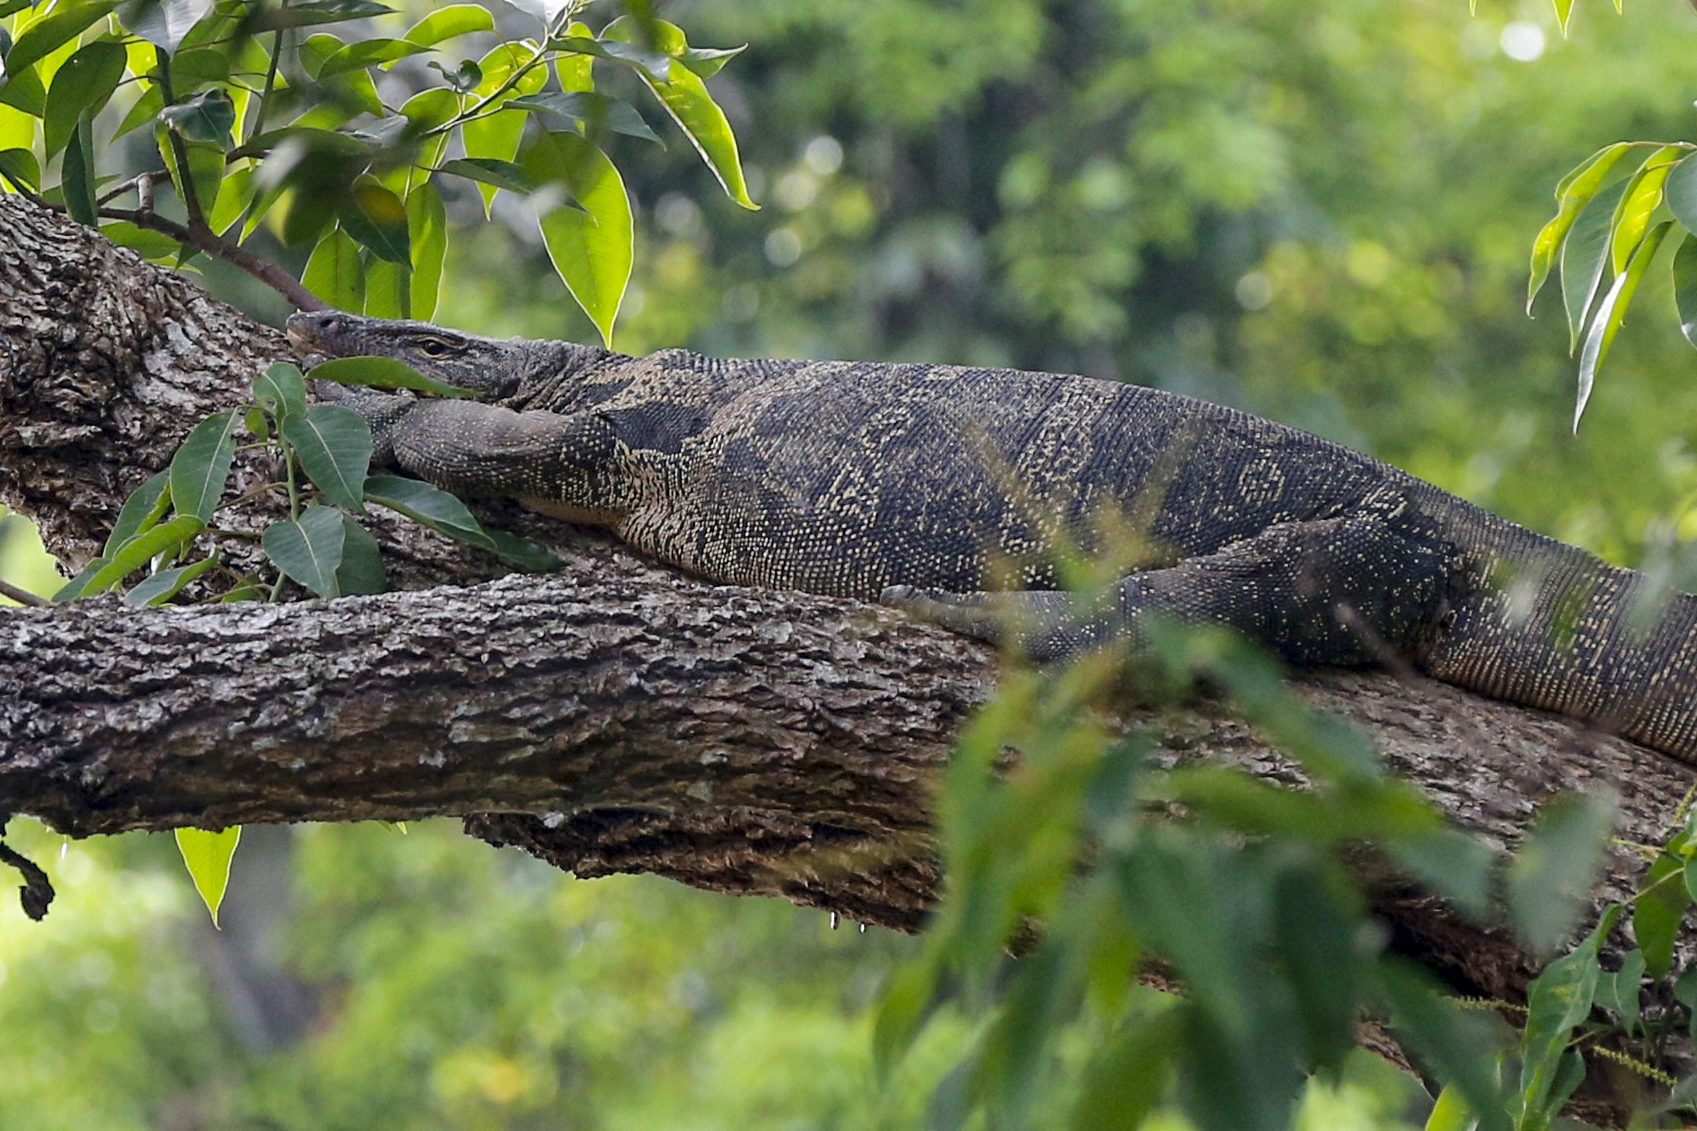 A monitor lizard lies in a tree in the Khao Yai national park on March 18, 2017 in Bangkok, Thailand. (Photo by Isa Foltin/Getty Images)